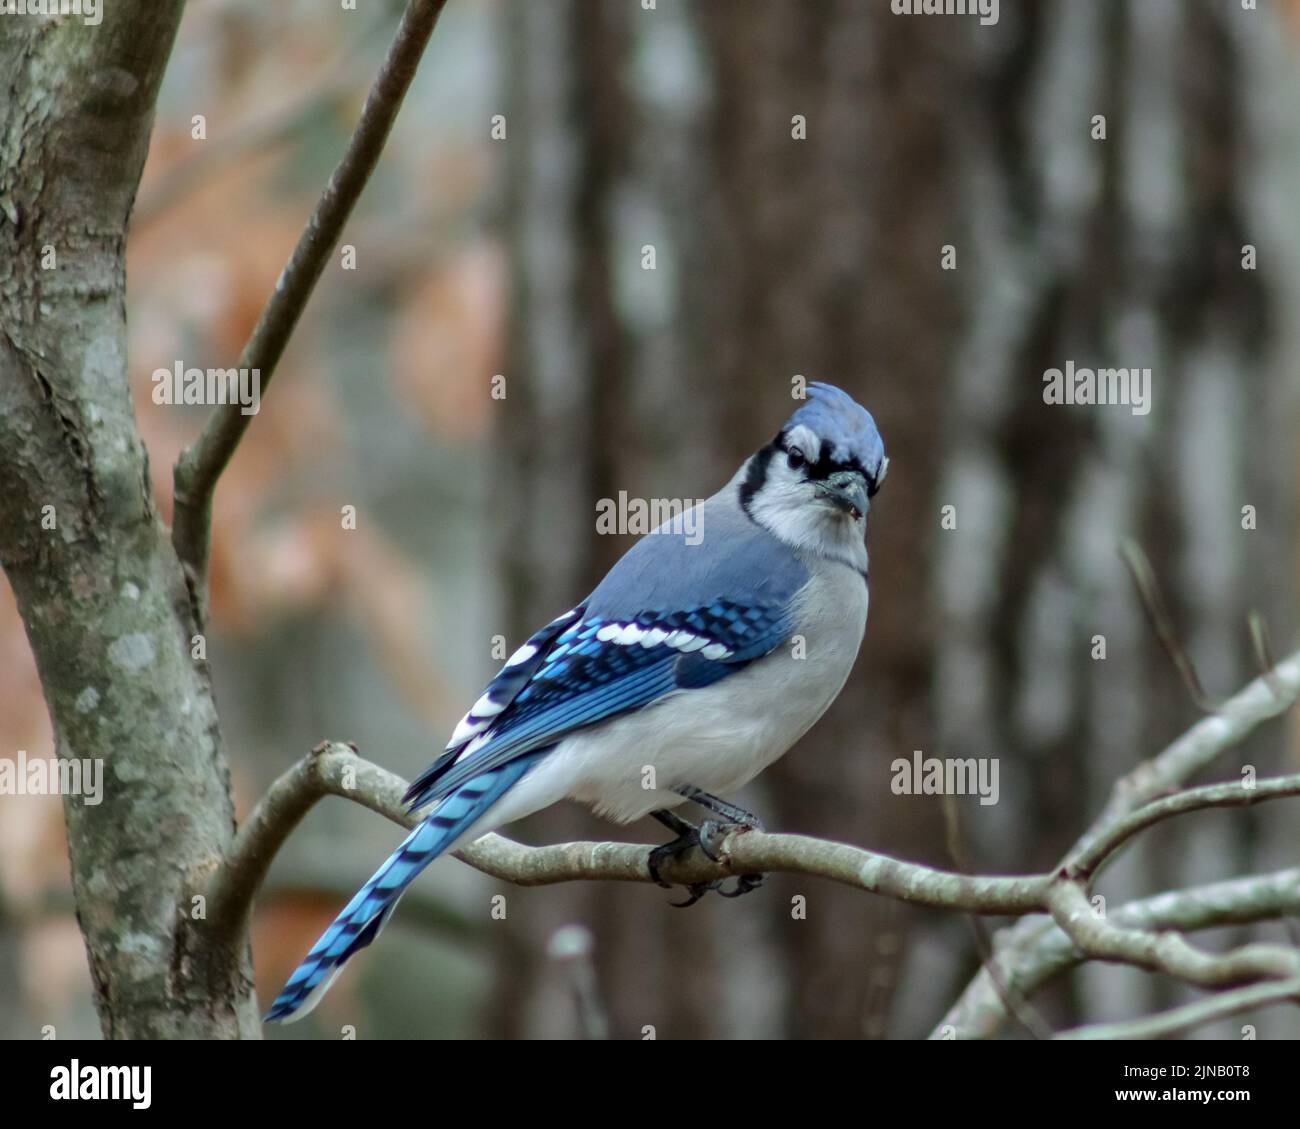 A closeup shot of a blue jay perched on a wooden tree branch in a forest in daylight Stock Photo